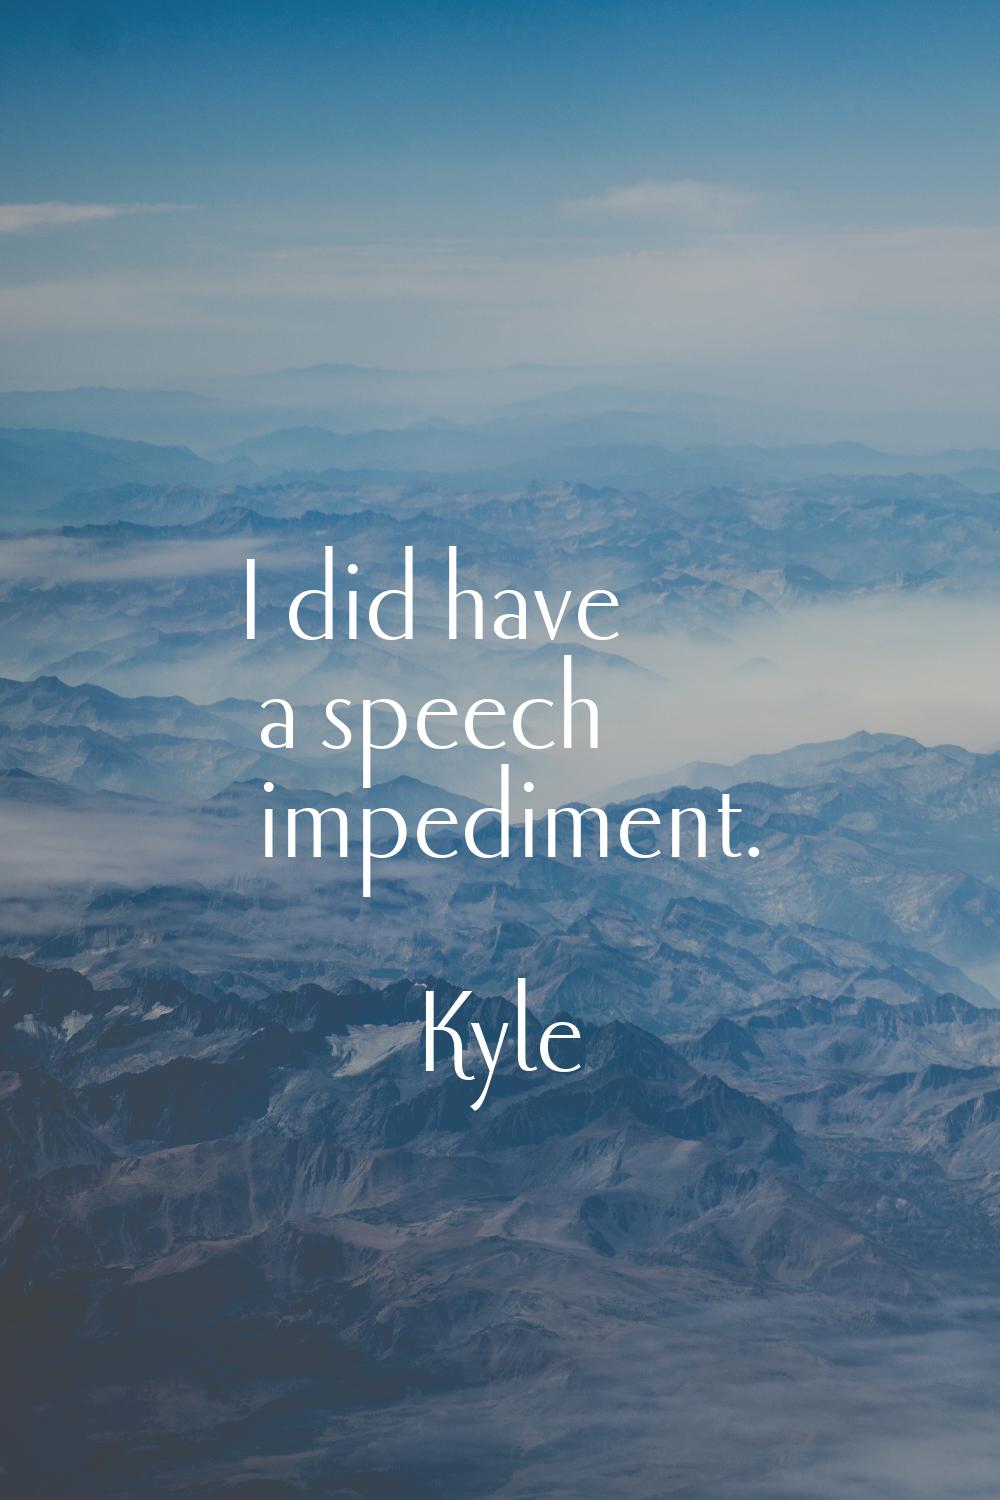 I did have a speech impediment.